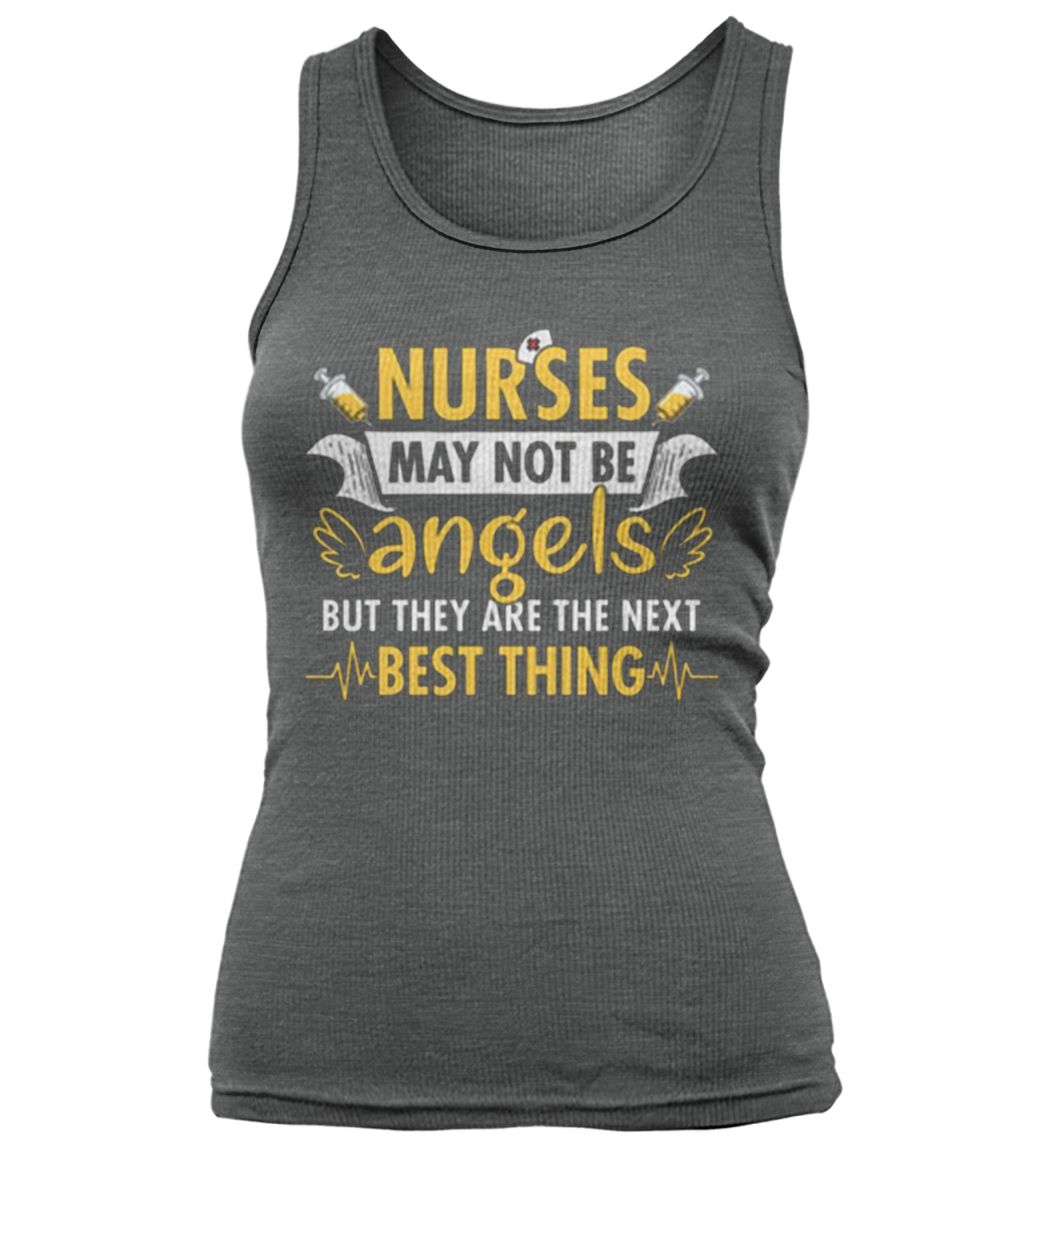 Nurses may not be angels but they are best thing women's tank top